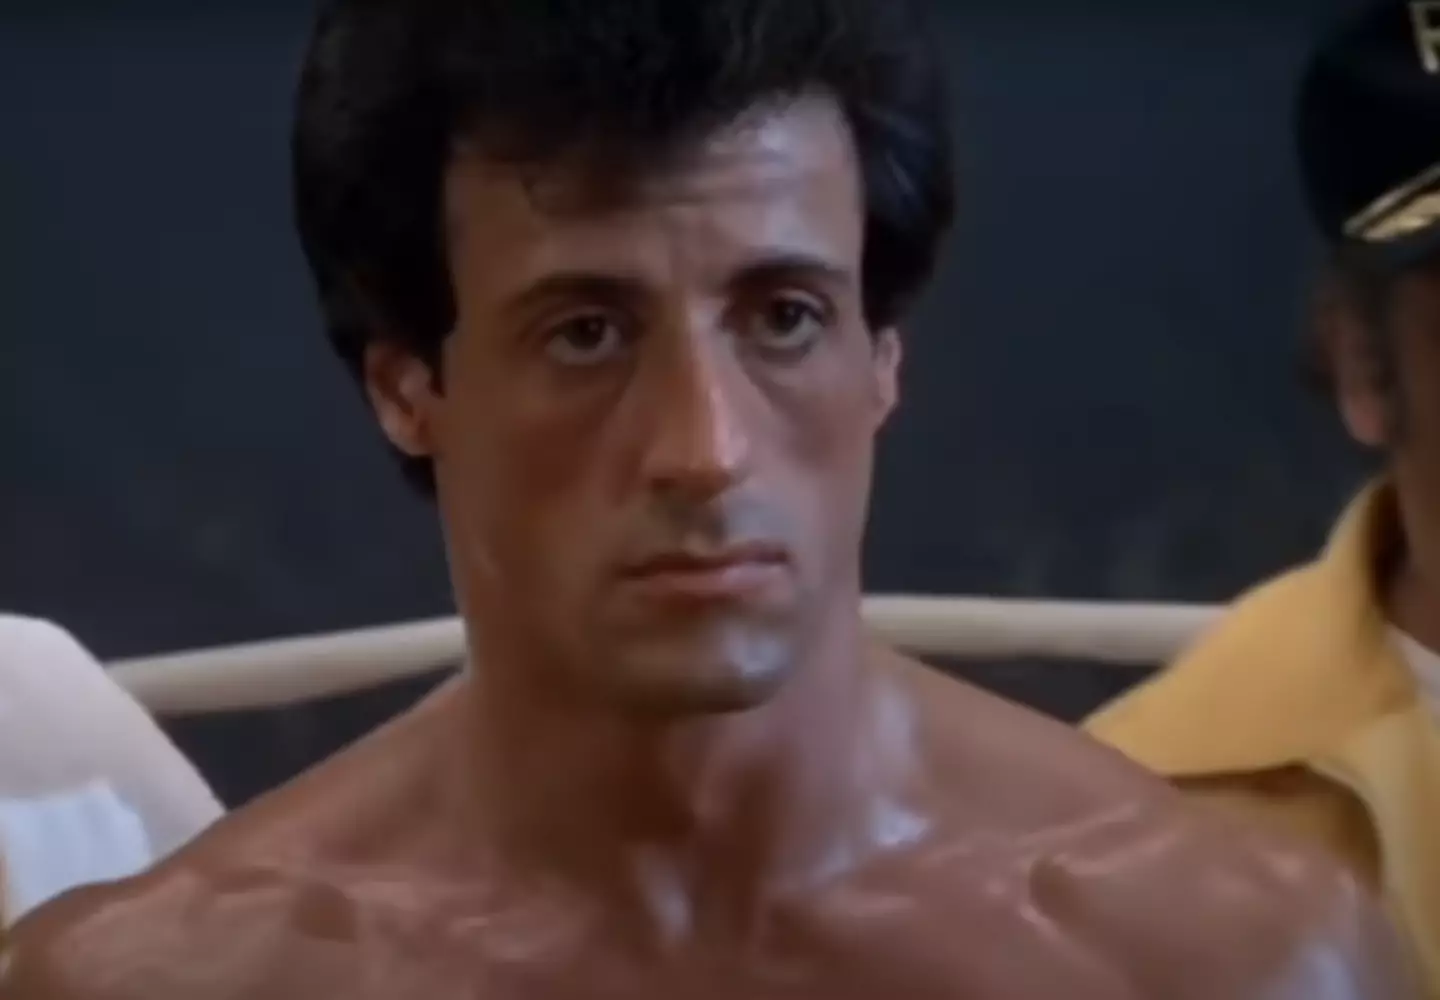 Sylvester Stallone came to prominence with his role in Rocky.